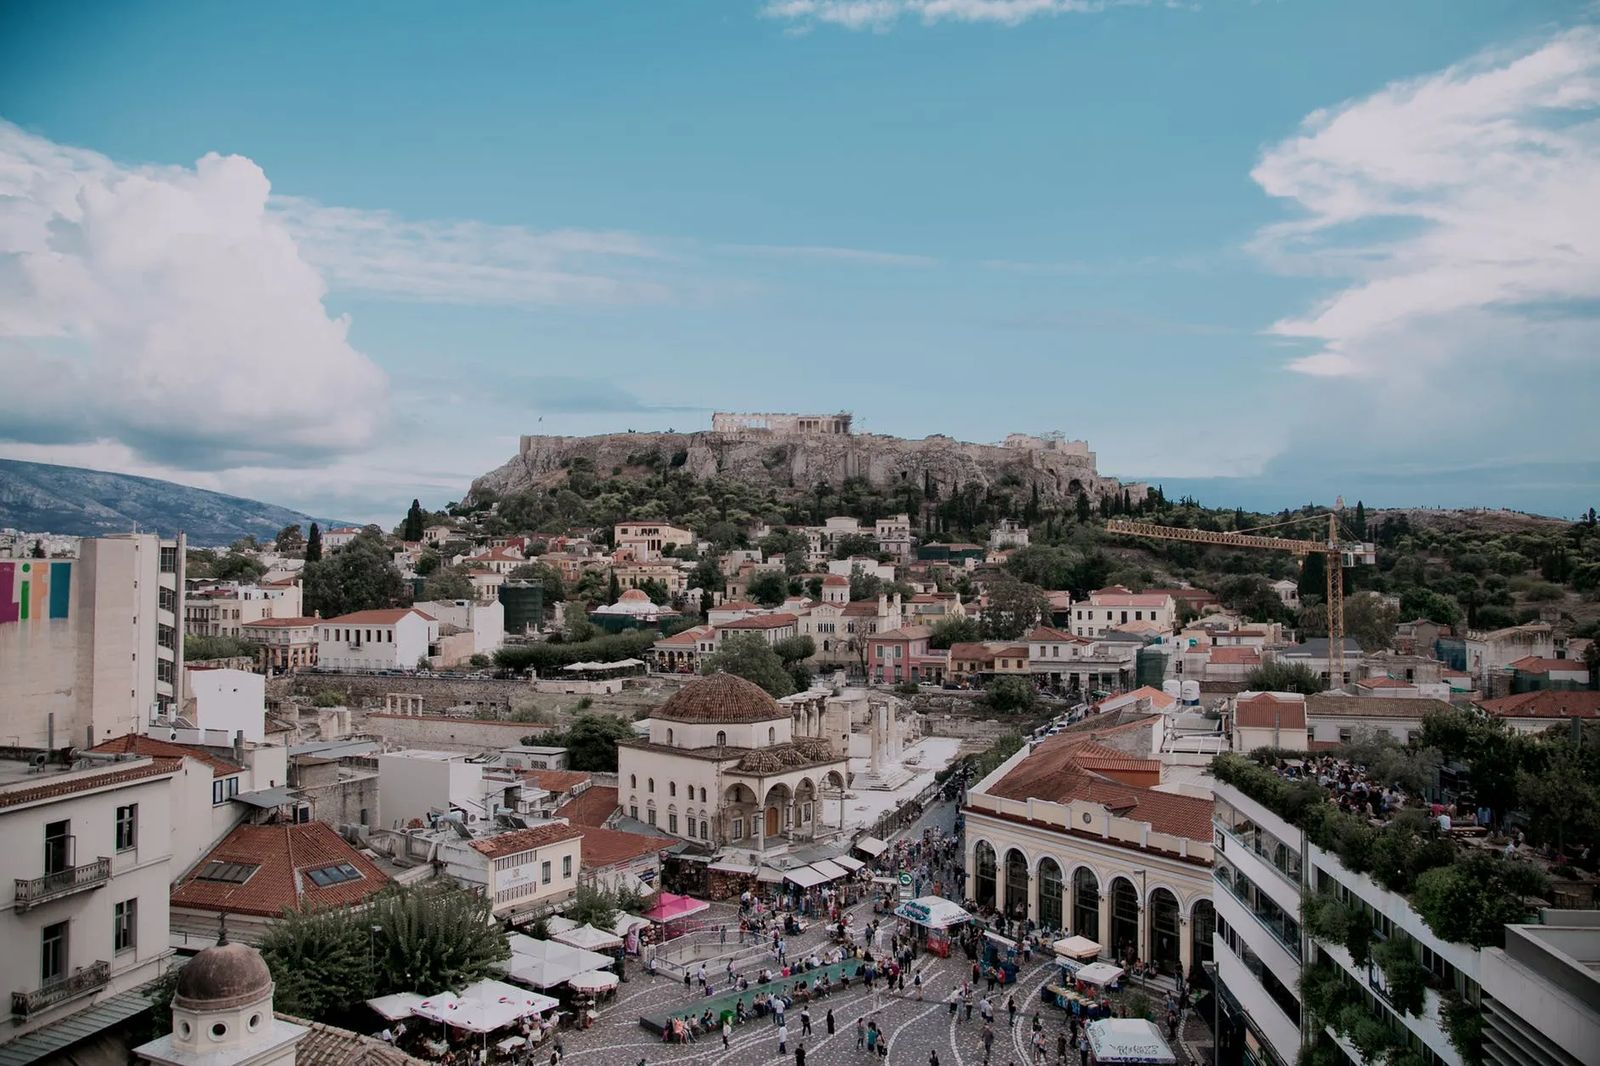 Visiting the Acropolis in Greece - Culture Trekking - #visitingtheacropolis #Greece #HistoryoftheAcropolis